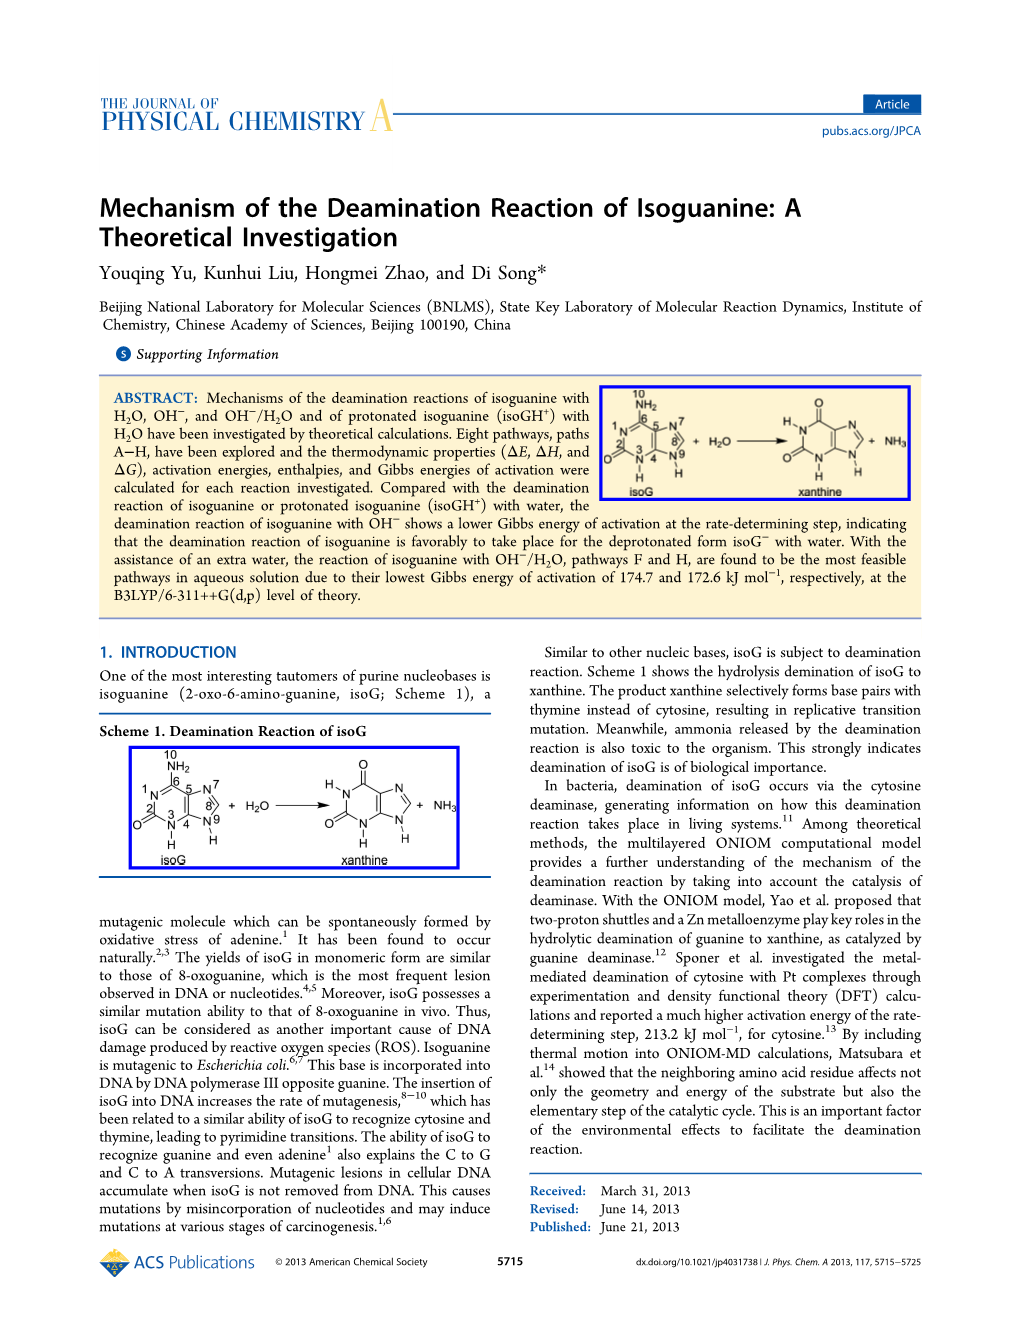 Mechanism of the Deamination Reaction of Isoguanine: A